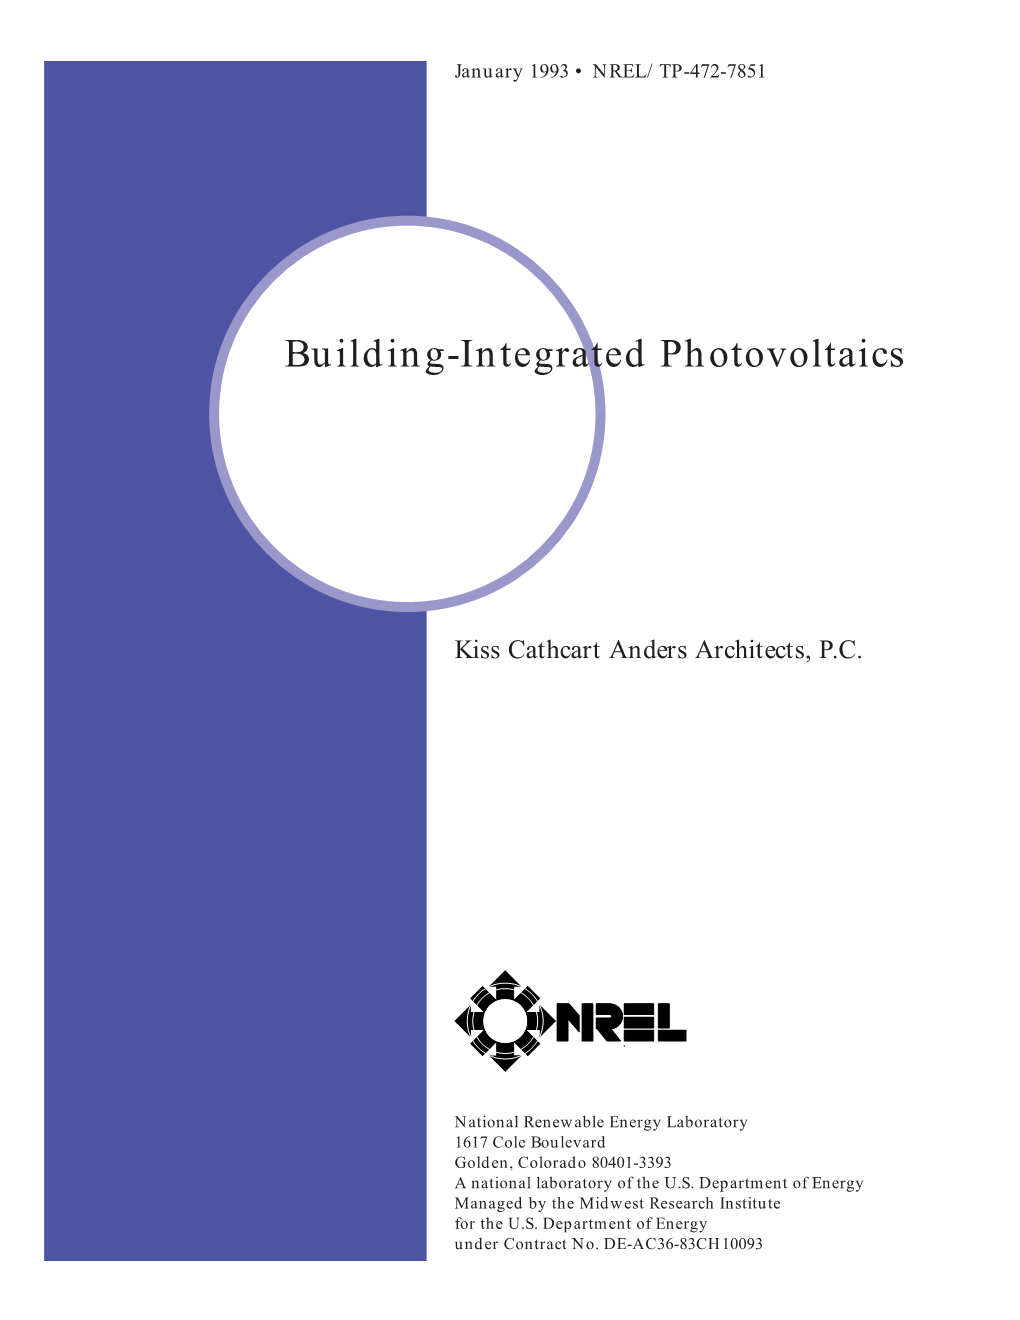 Building-Integrated Photovoltaics